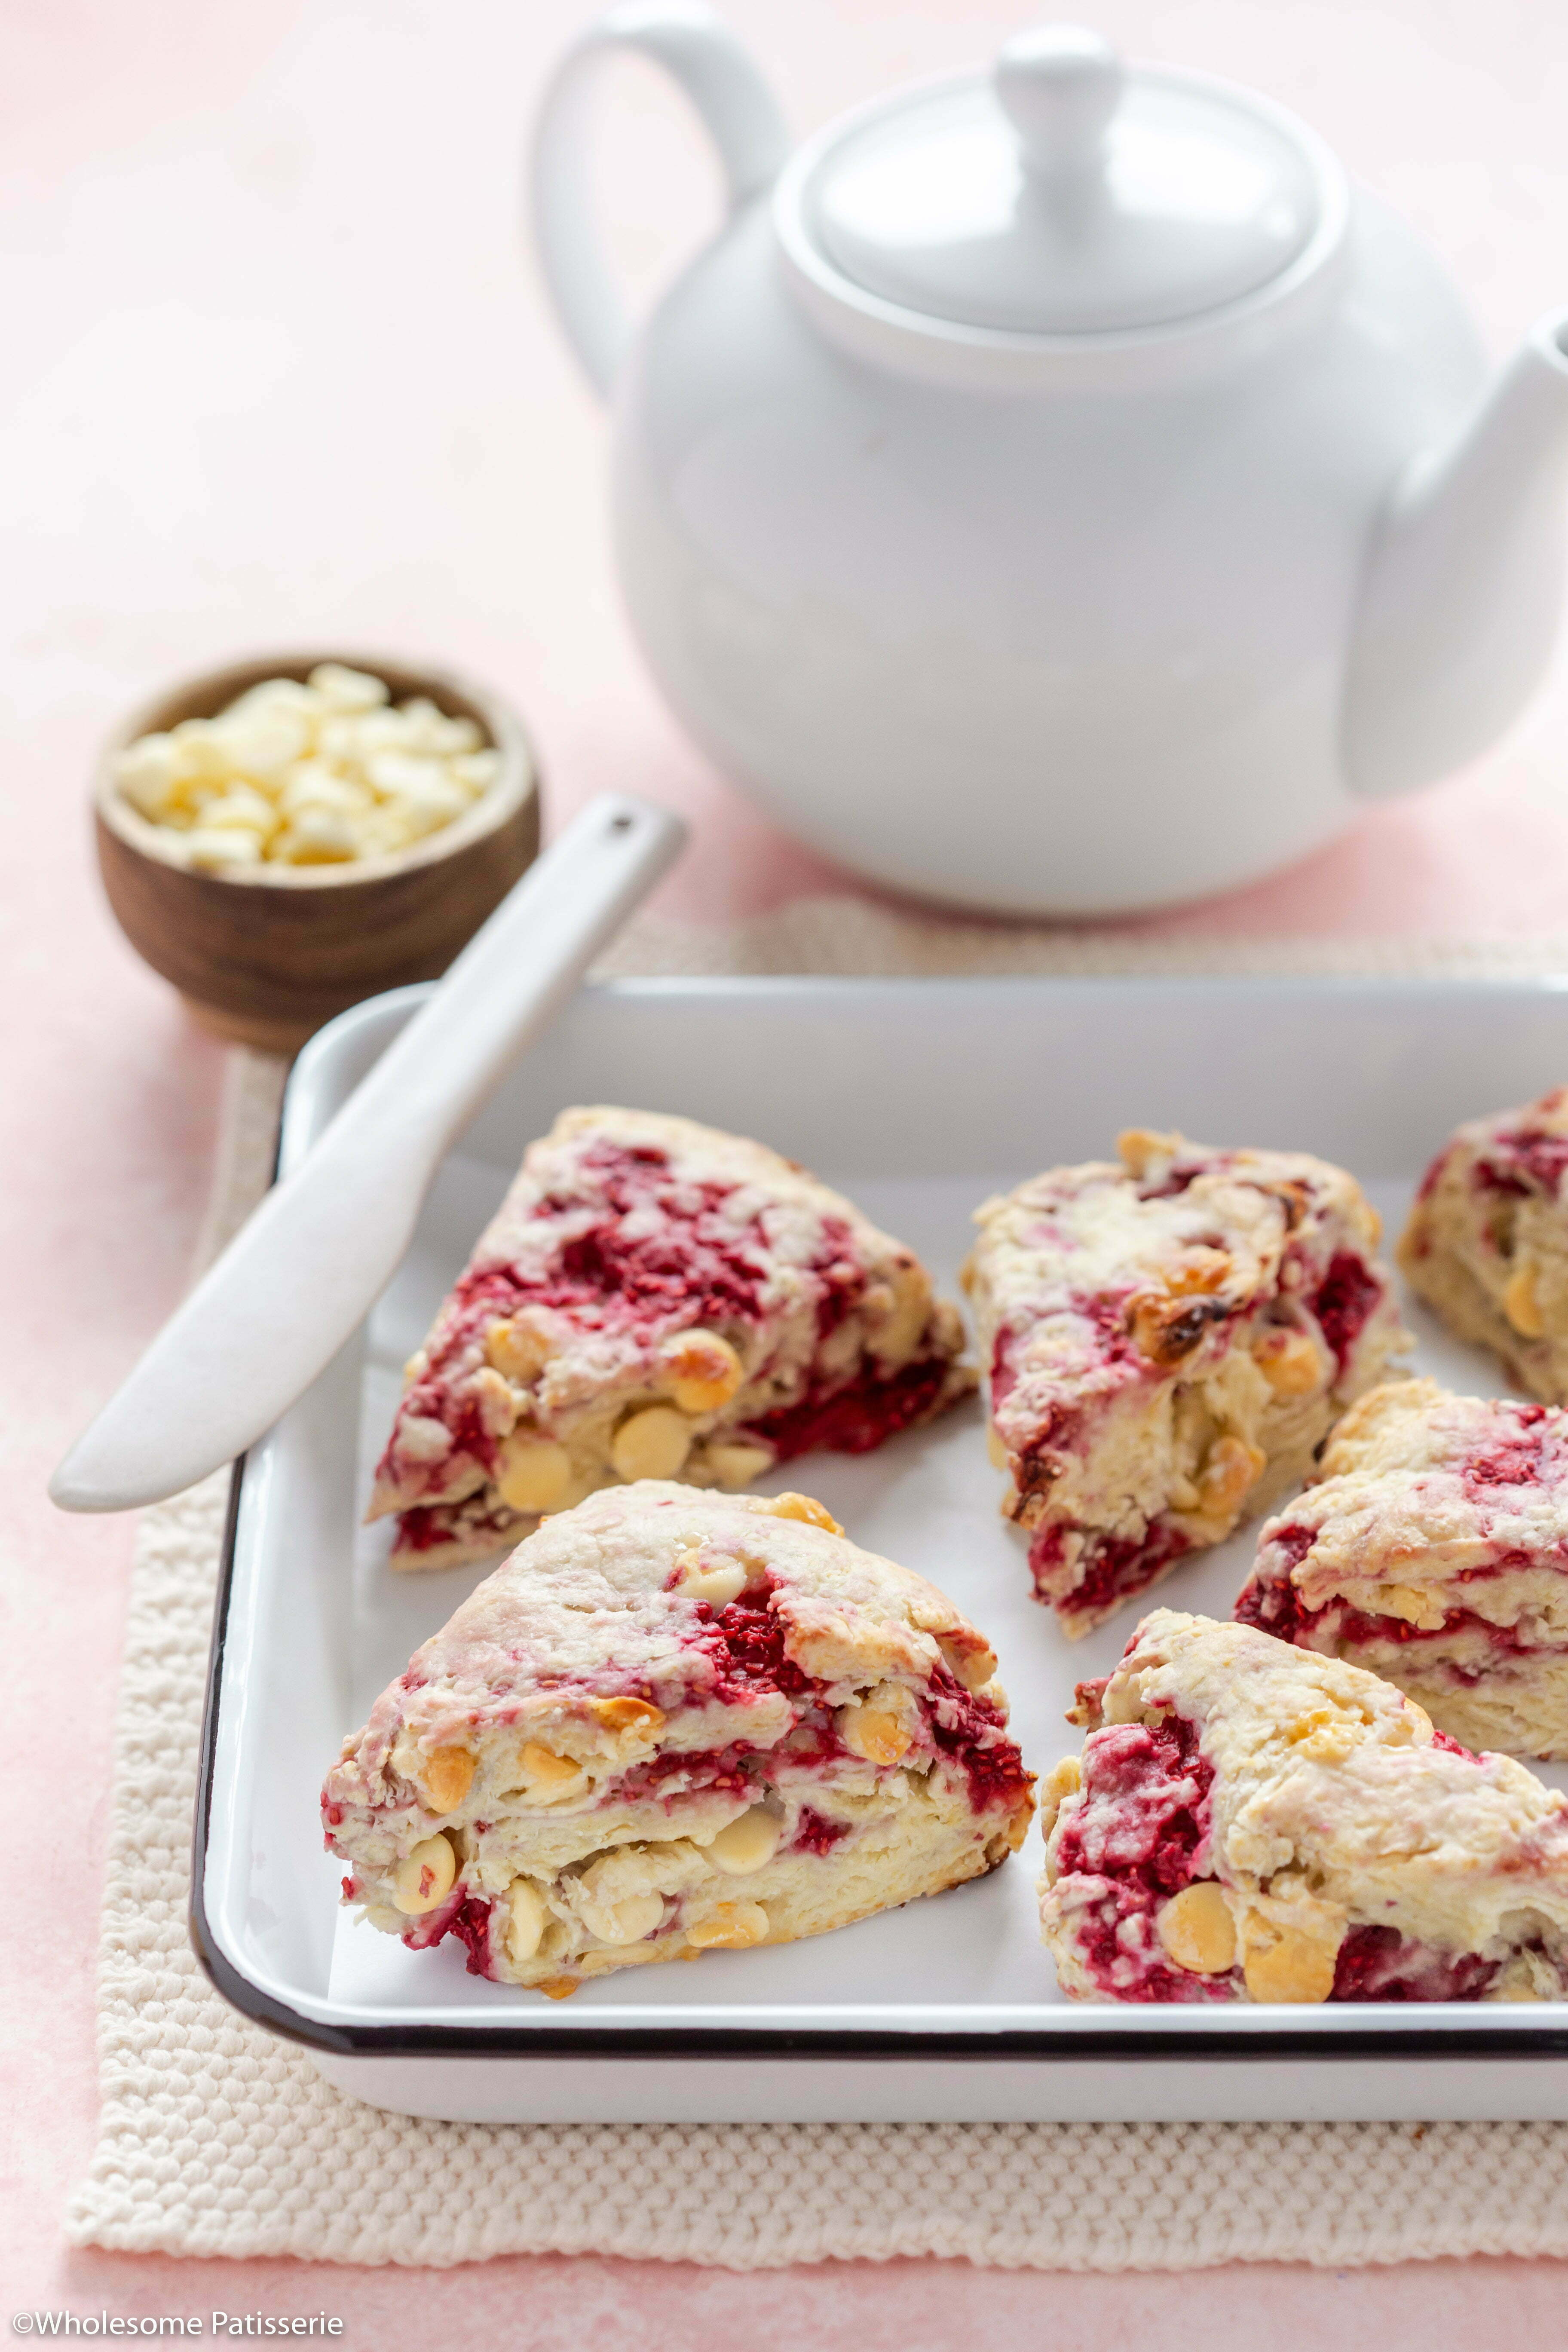 The raspberry white chocolate scones baked and ready to serve.